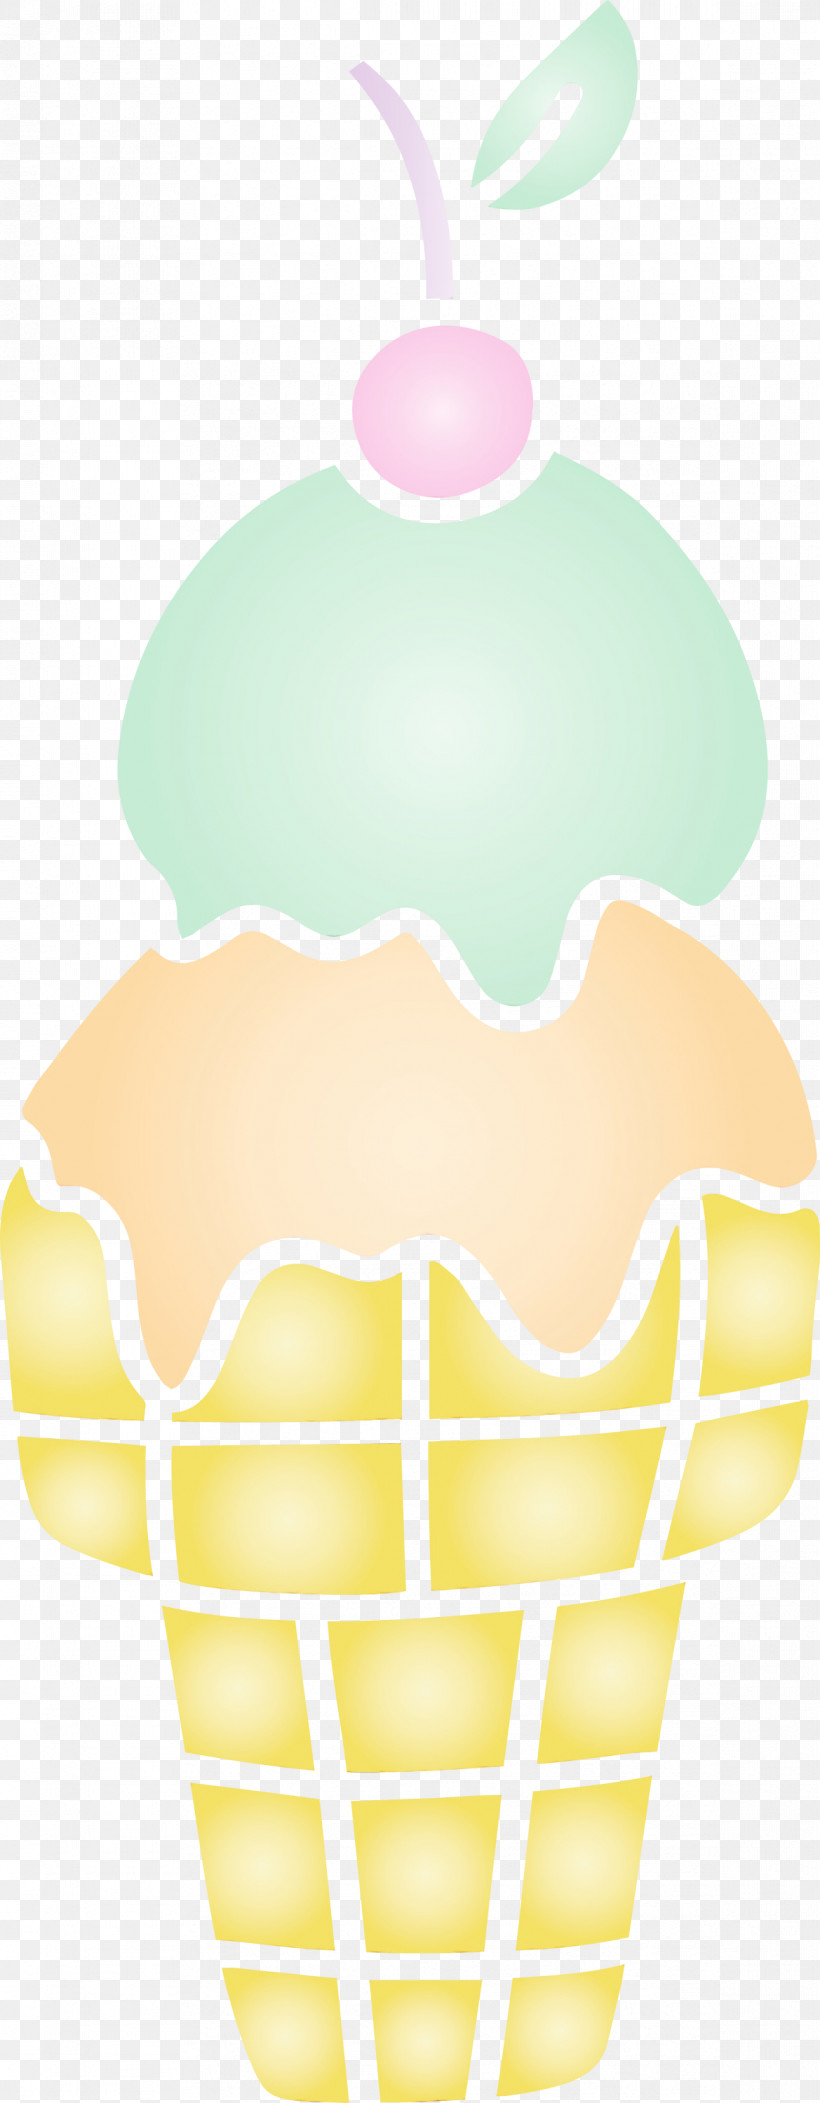 Ice Cream Cone Yellow Pattern Cone Fruit, PNG, 1169x2999px, Ice Cream, Cone, Fruit, Ice Cream Cone, Paint Download Free